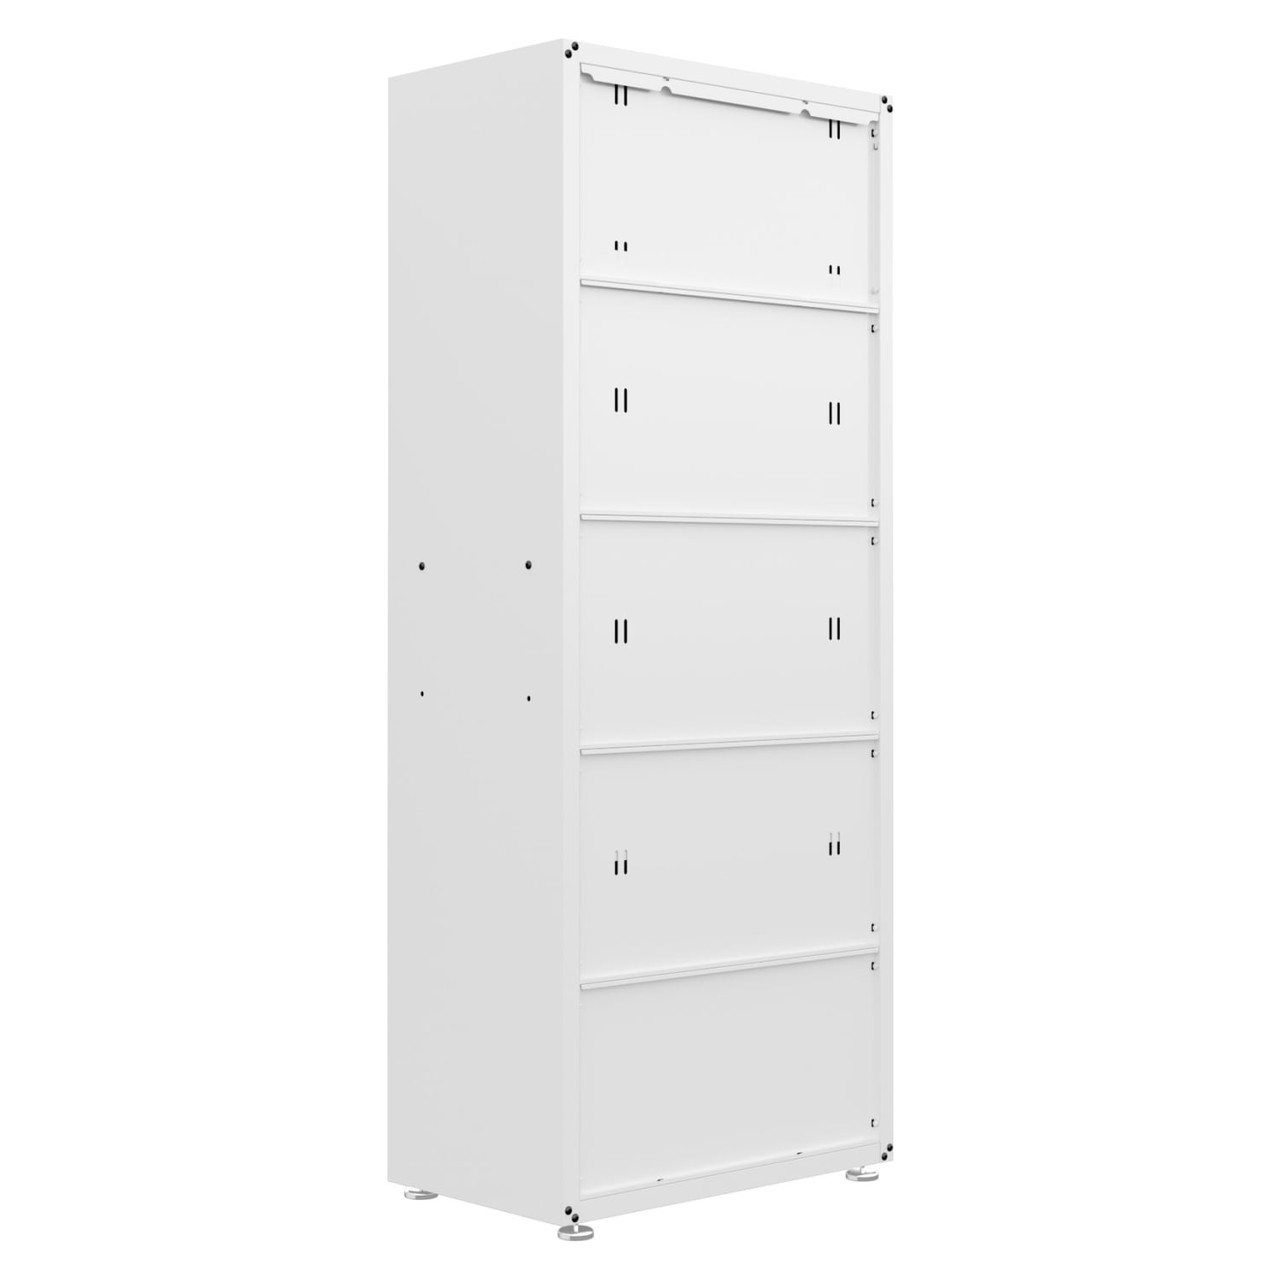 Fortress Textured Metal 75.4” Garage Cabinet with 4 Adjustable Shelves in White